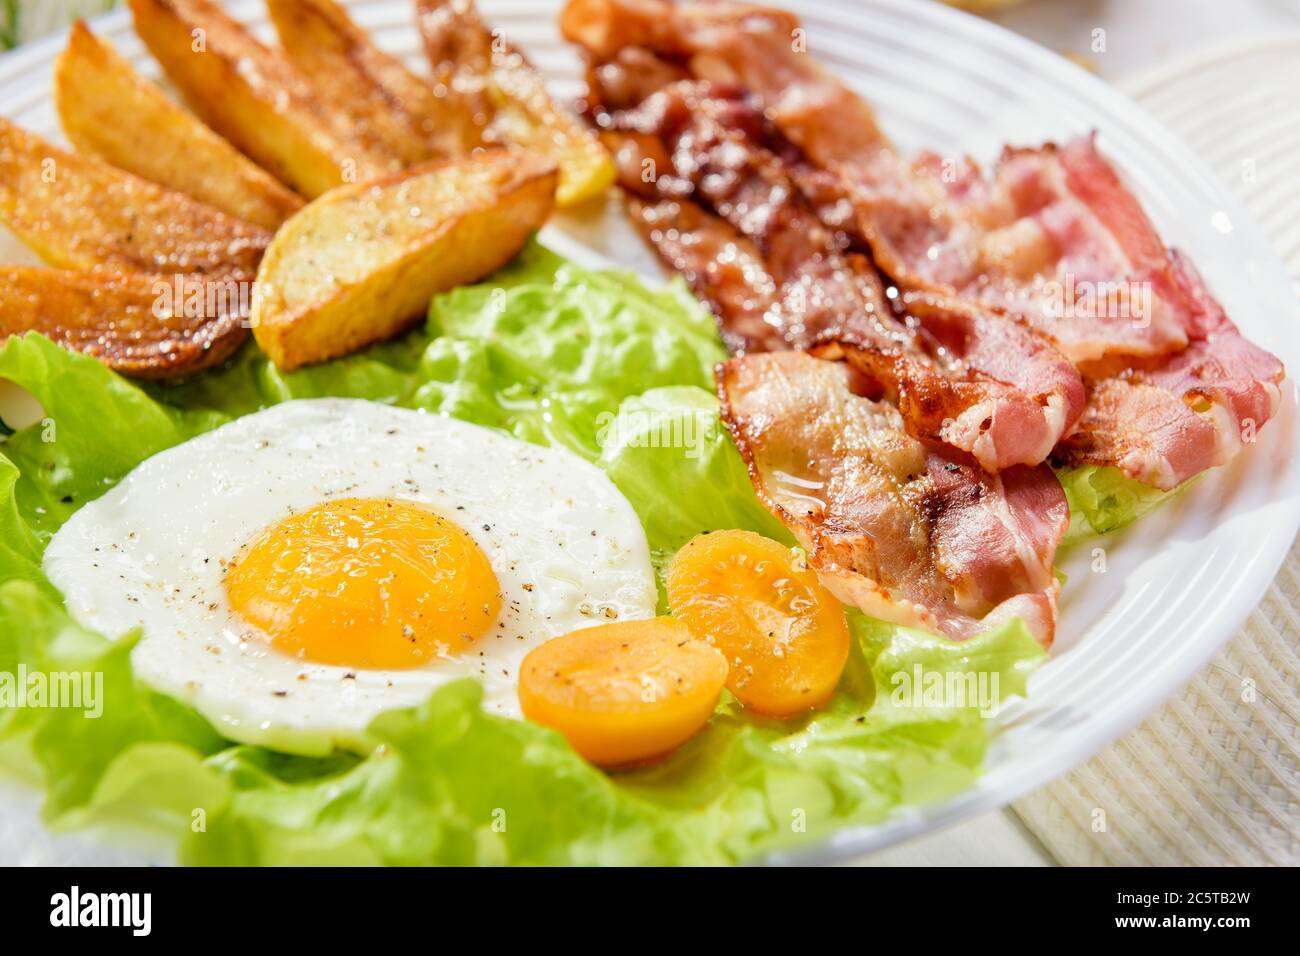 Fried bacon with French fries and a delicate egg, close-up. Stock Photo